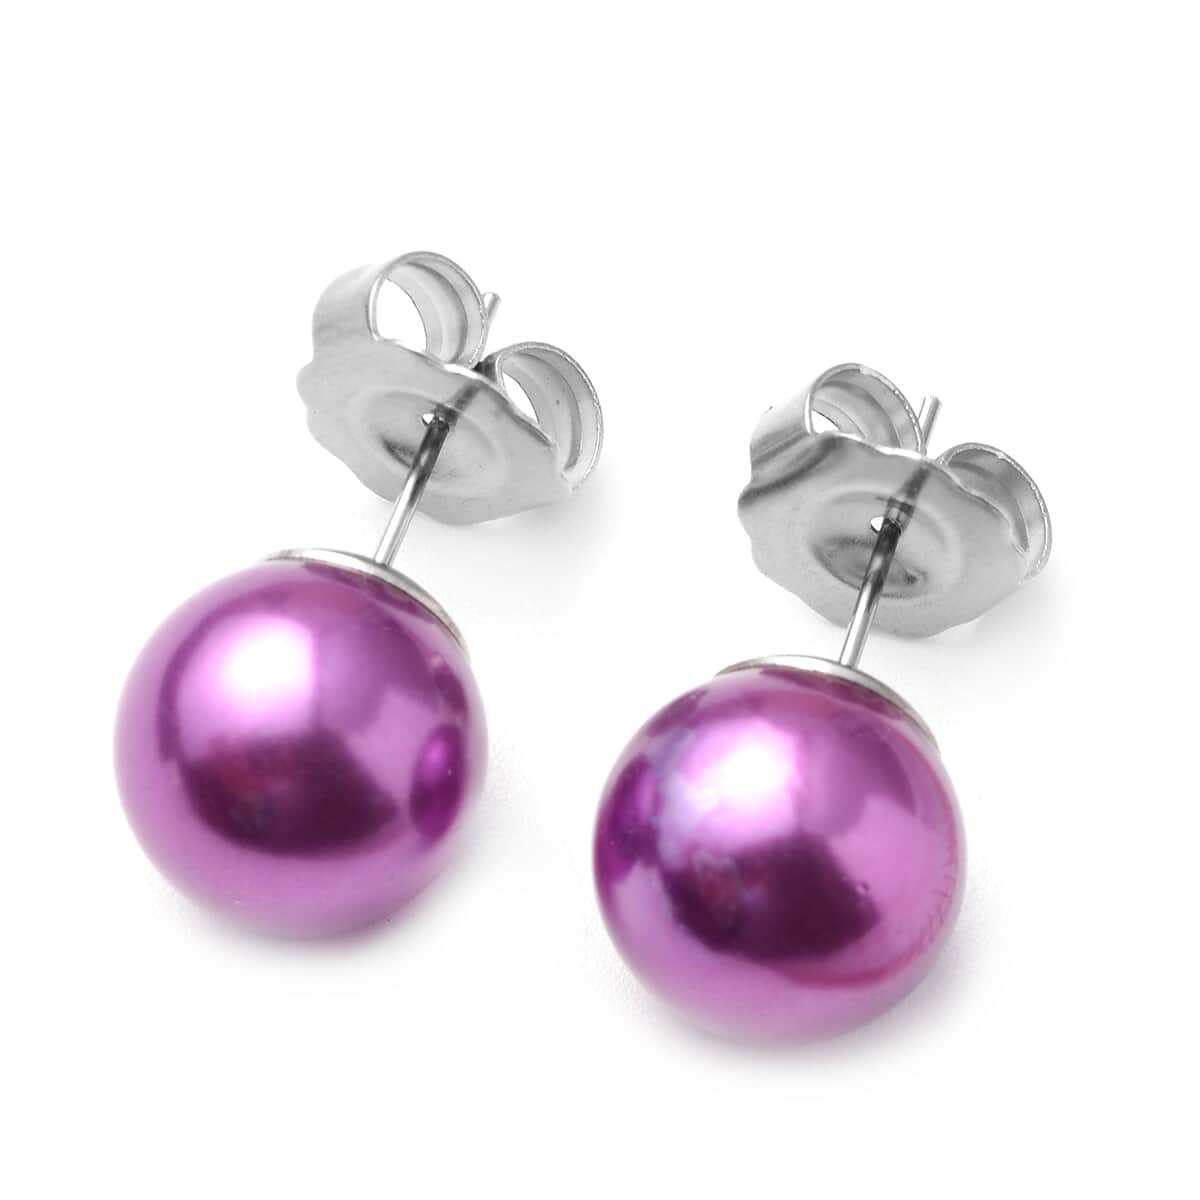 Set of 2 Simulated Purple Pearl Necklace 20-22 Inches and Earrings in Silvertone and Stainless Steel image number 5